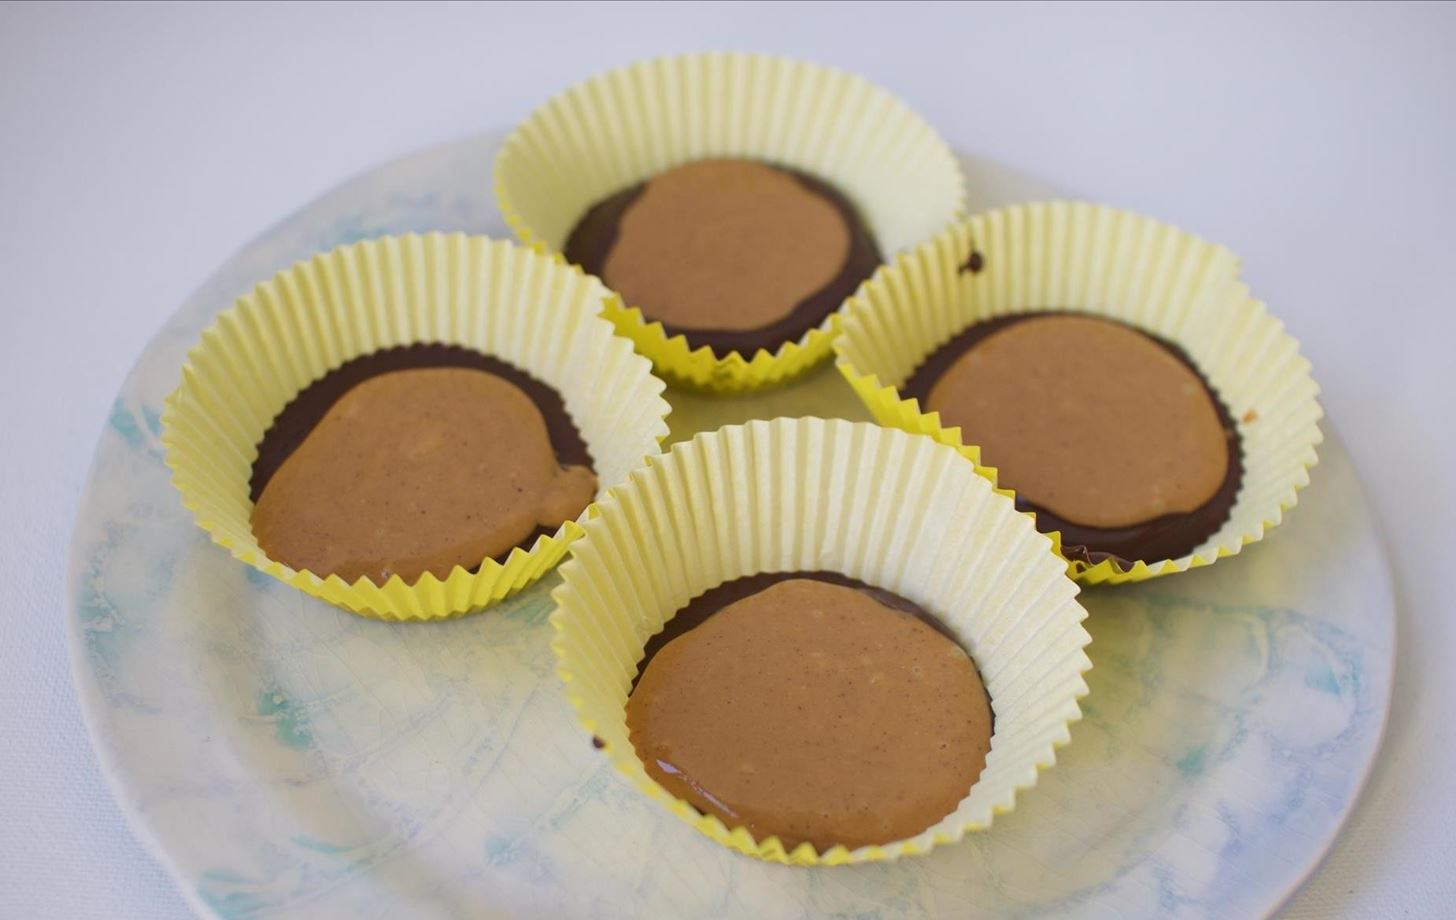 Making Reese's Peanut Butter Cups at Home Is Super Simple